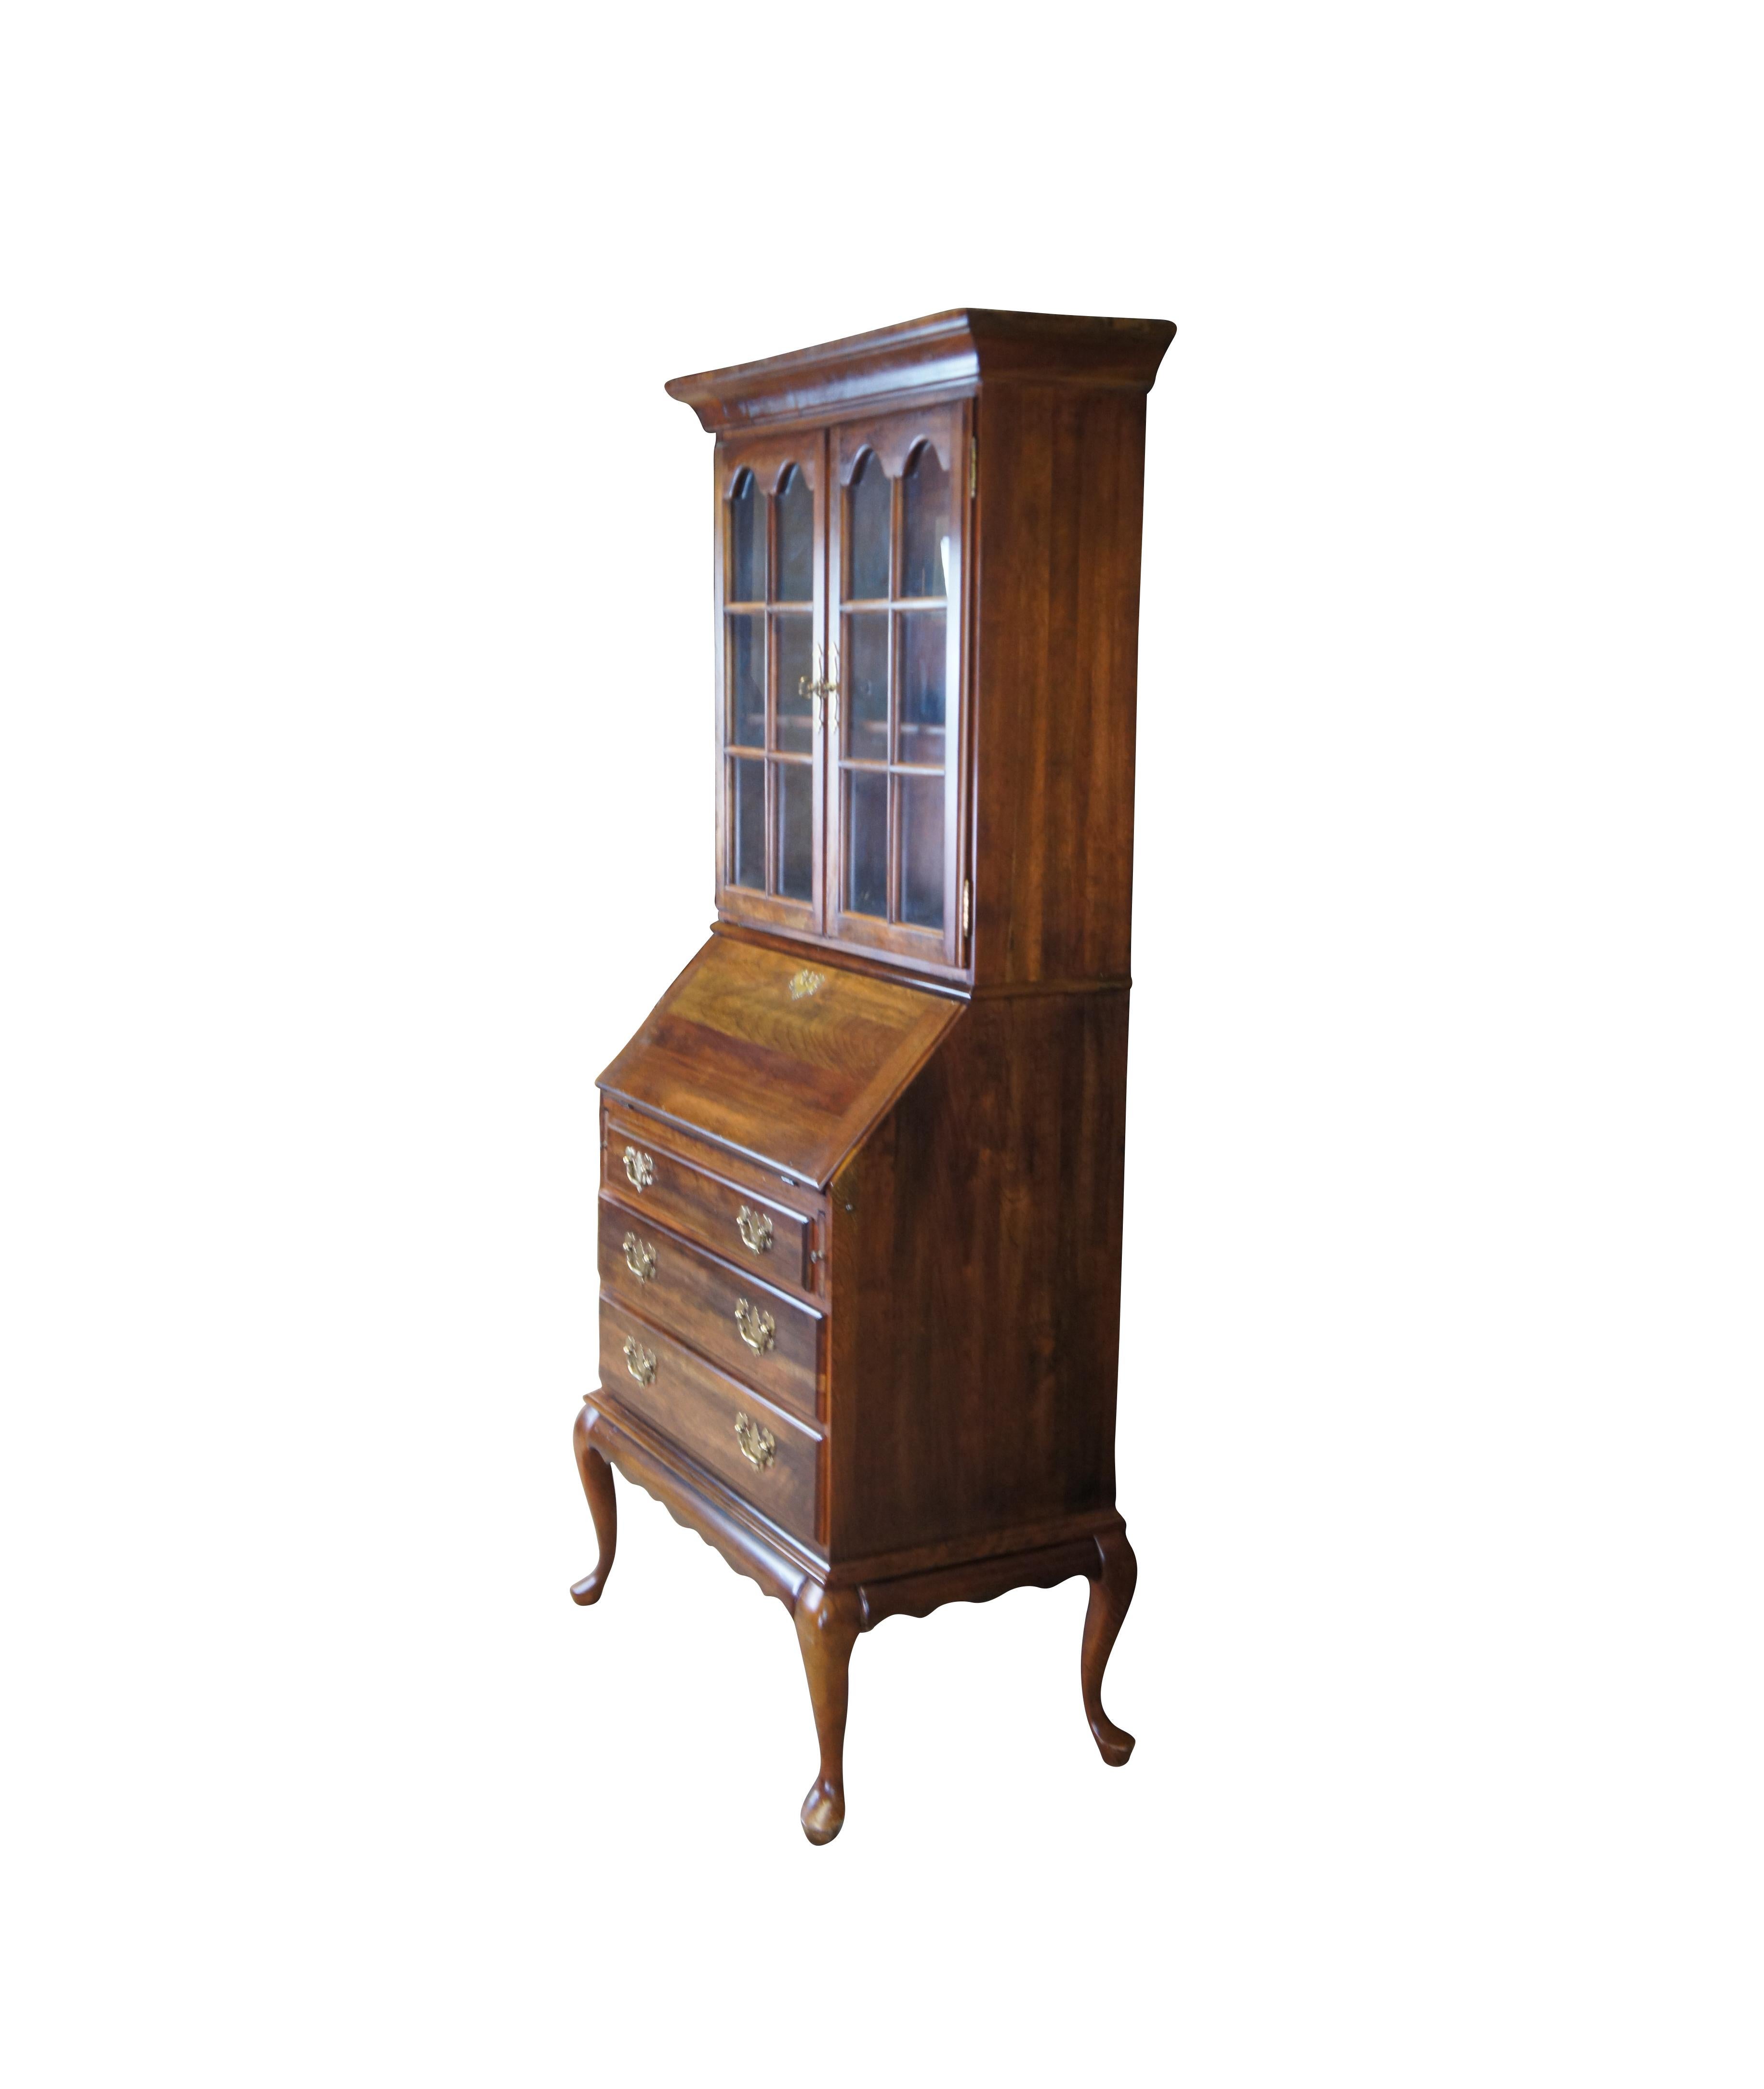 Beautiful Queen Anne style secretary desk and bookcase by Cresent Manufacturing Company, circa 1970s. Made from cherry with a natural distressed finish. Features an upper bookcase with two shelves and lattice covered glass doors with an arched